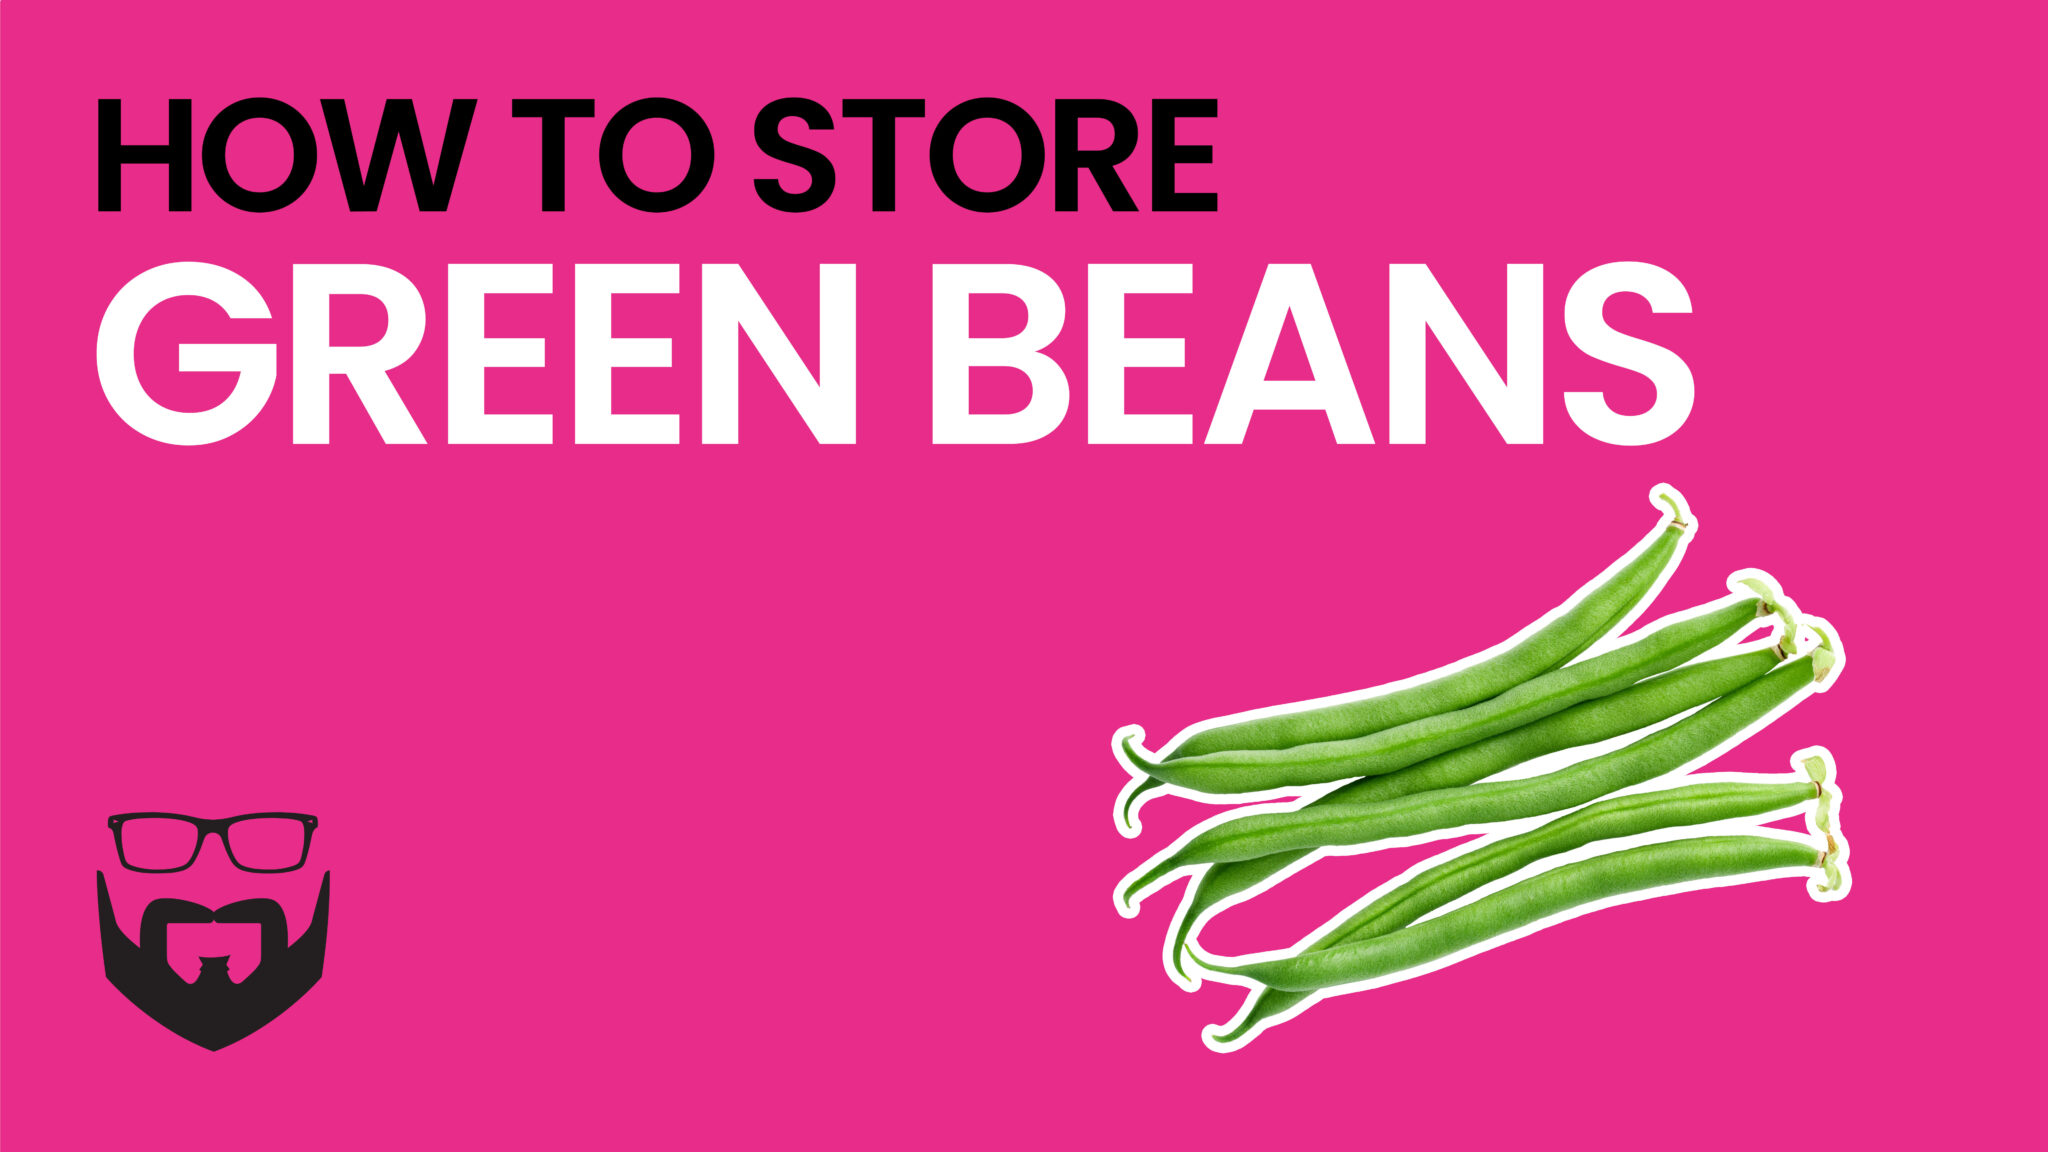 How to Store Green Beans Video - Pink